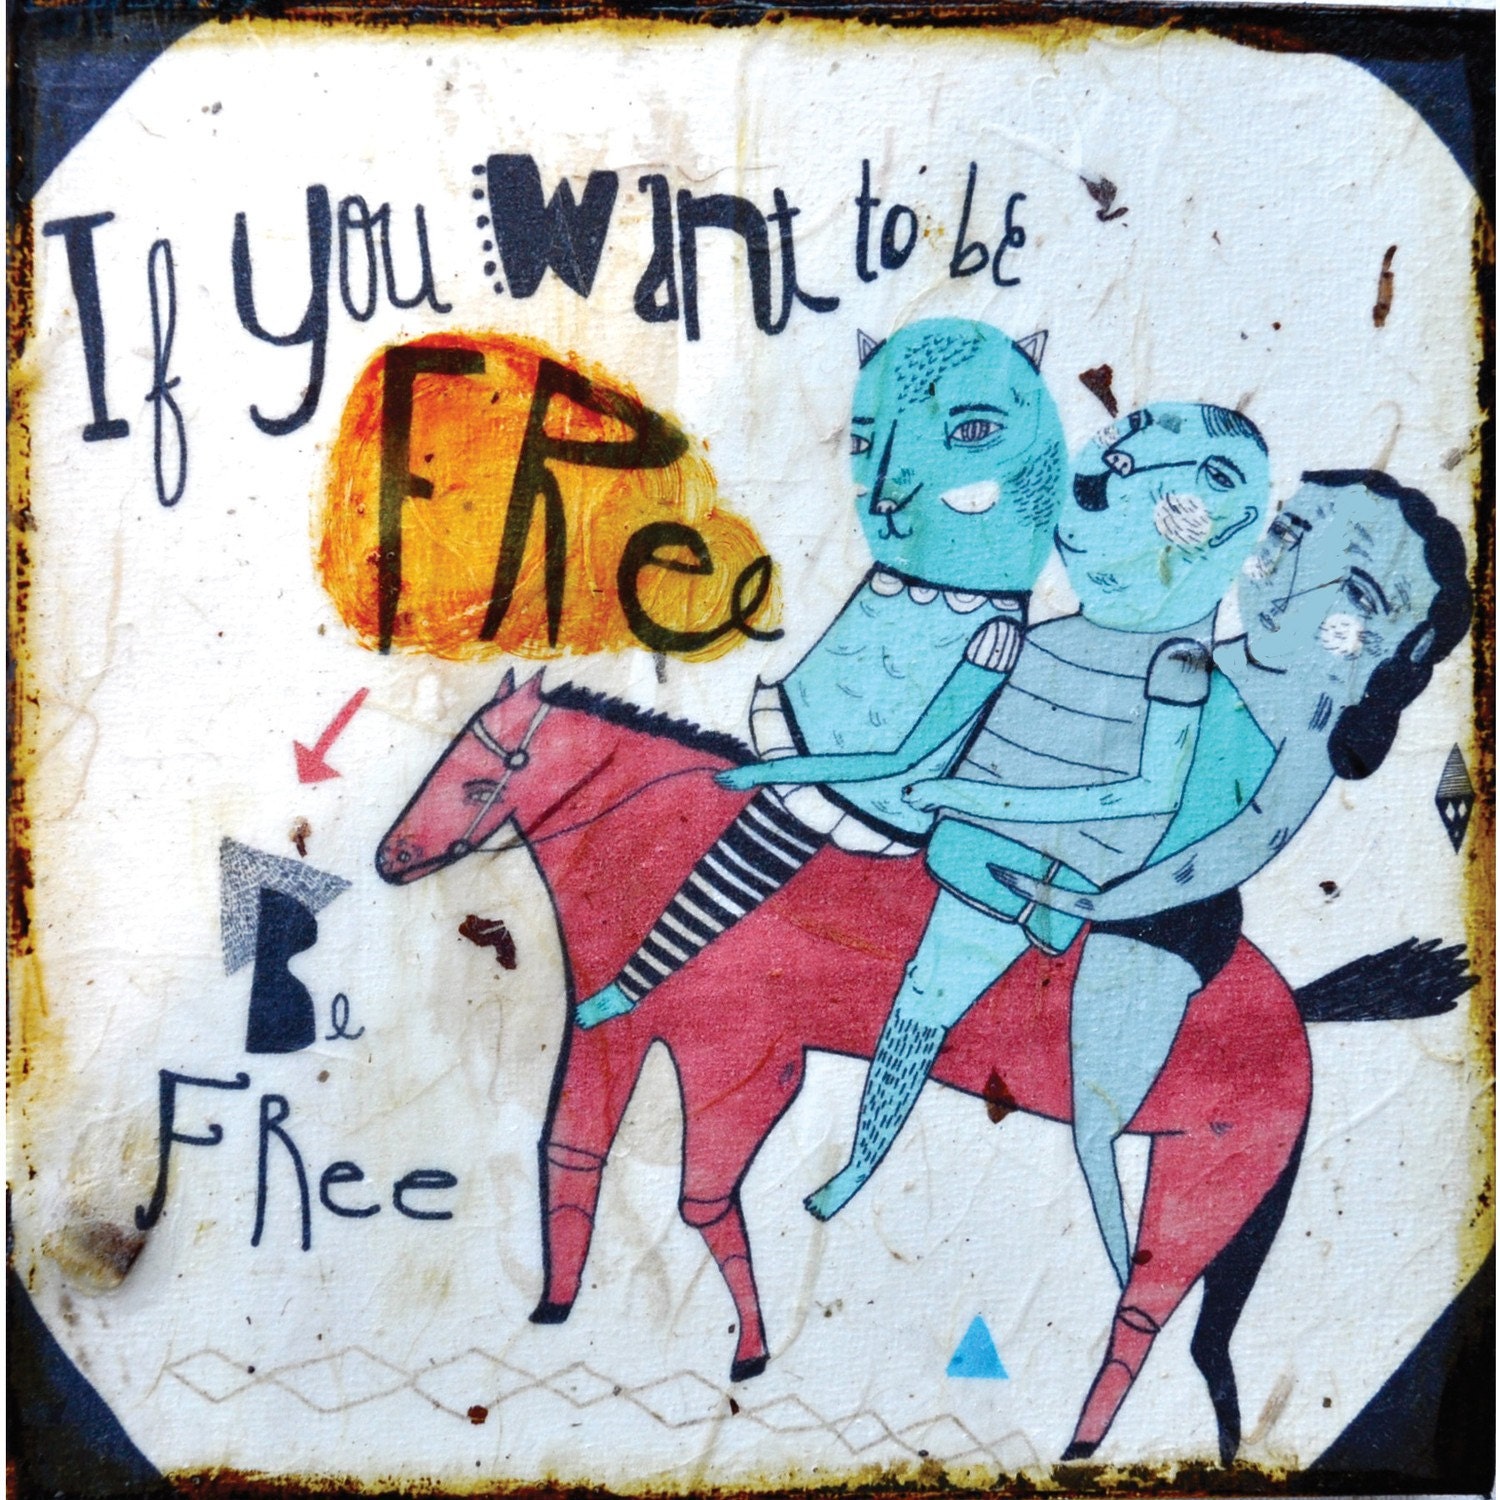 If you want to be free, be free -mixed media print on wood